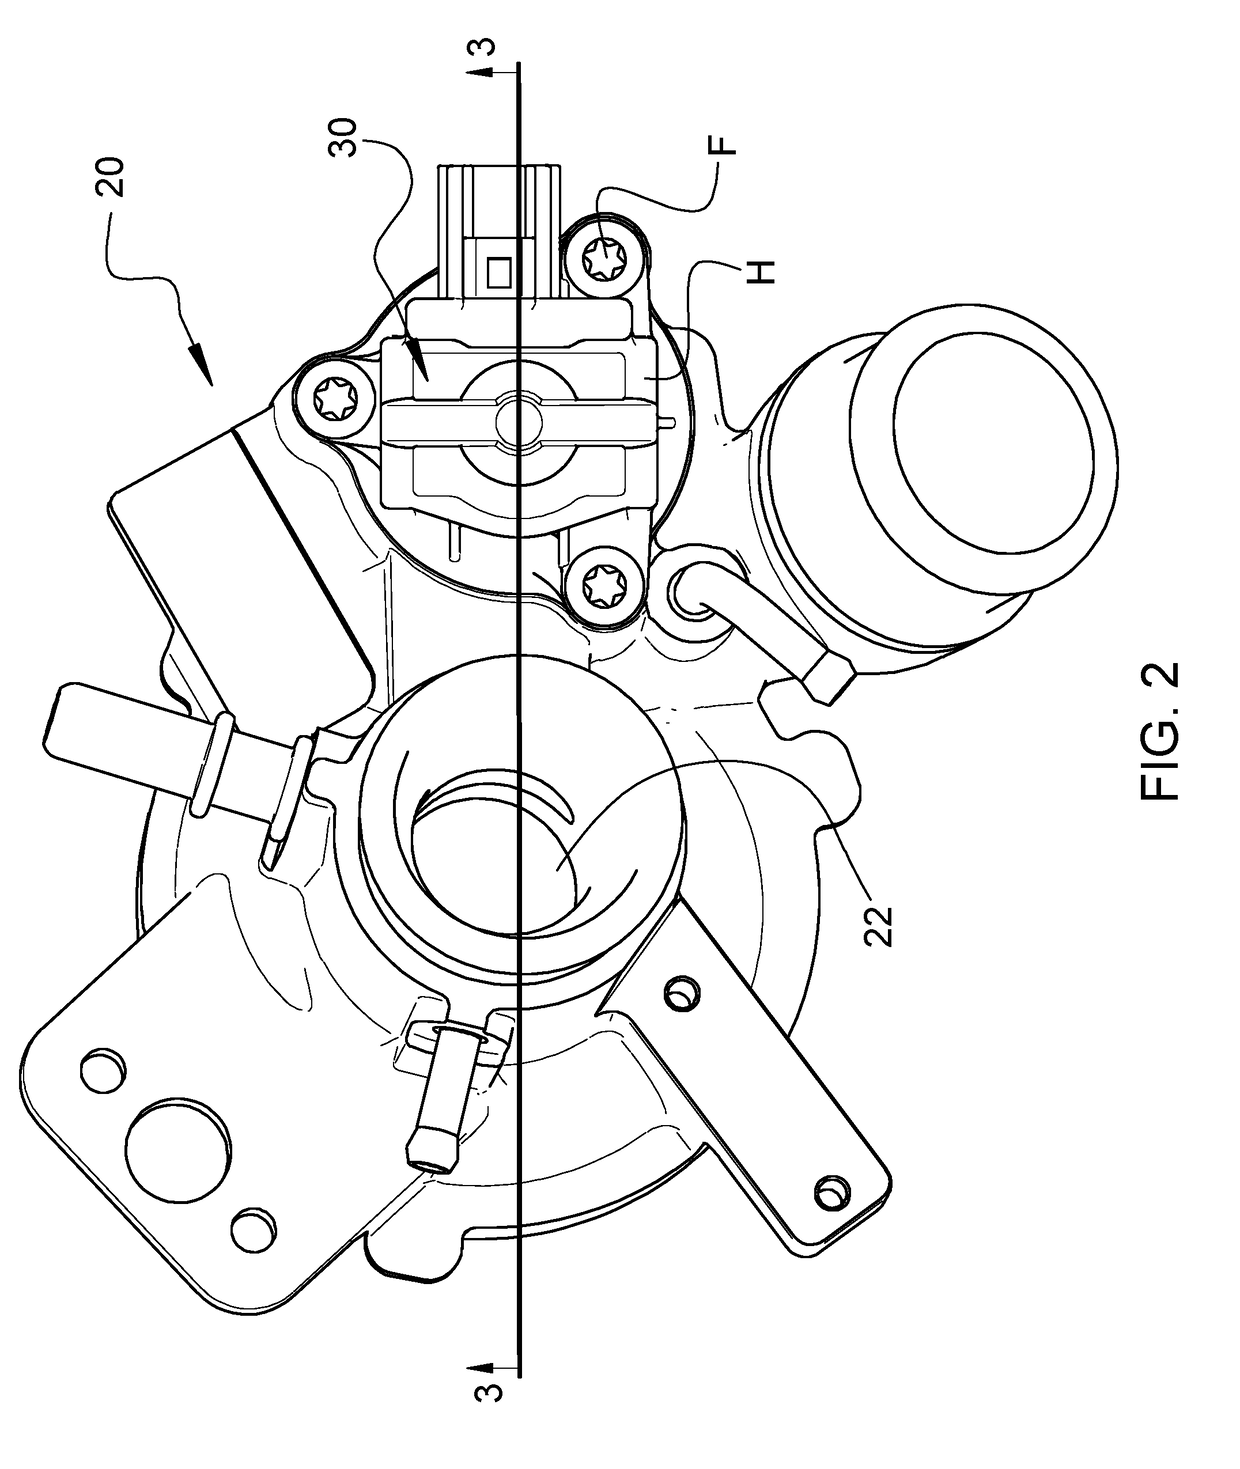 Compressor recirculation valve with valve seat structure for suppressing noise upon opening of valve